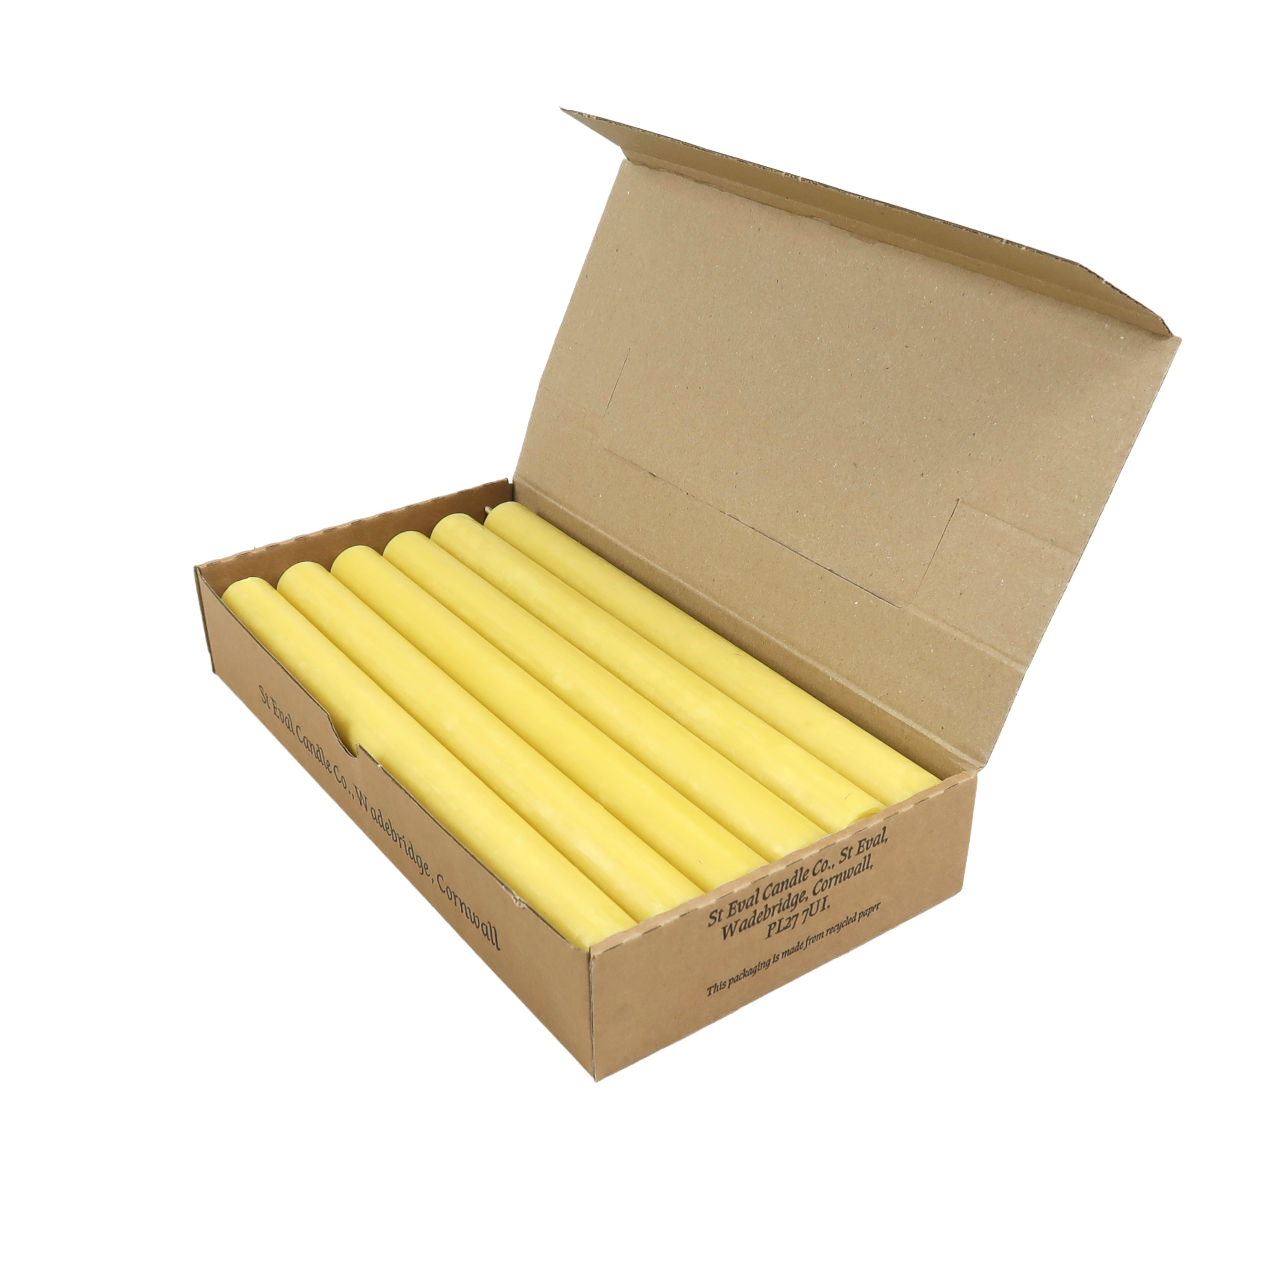 St Eval Candle Company Box of 12 Dinner Candles - Ochre